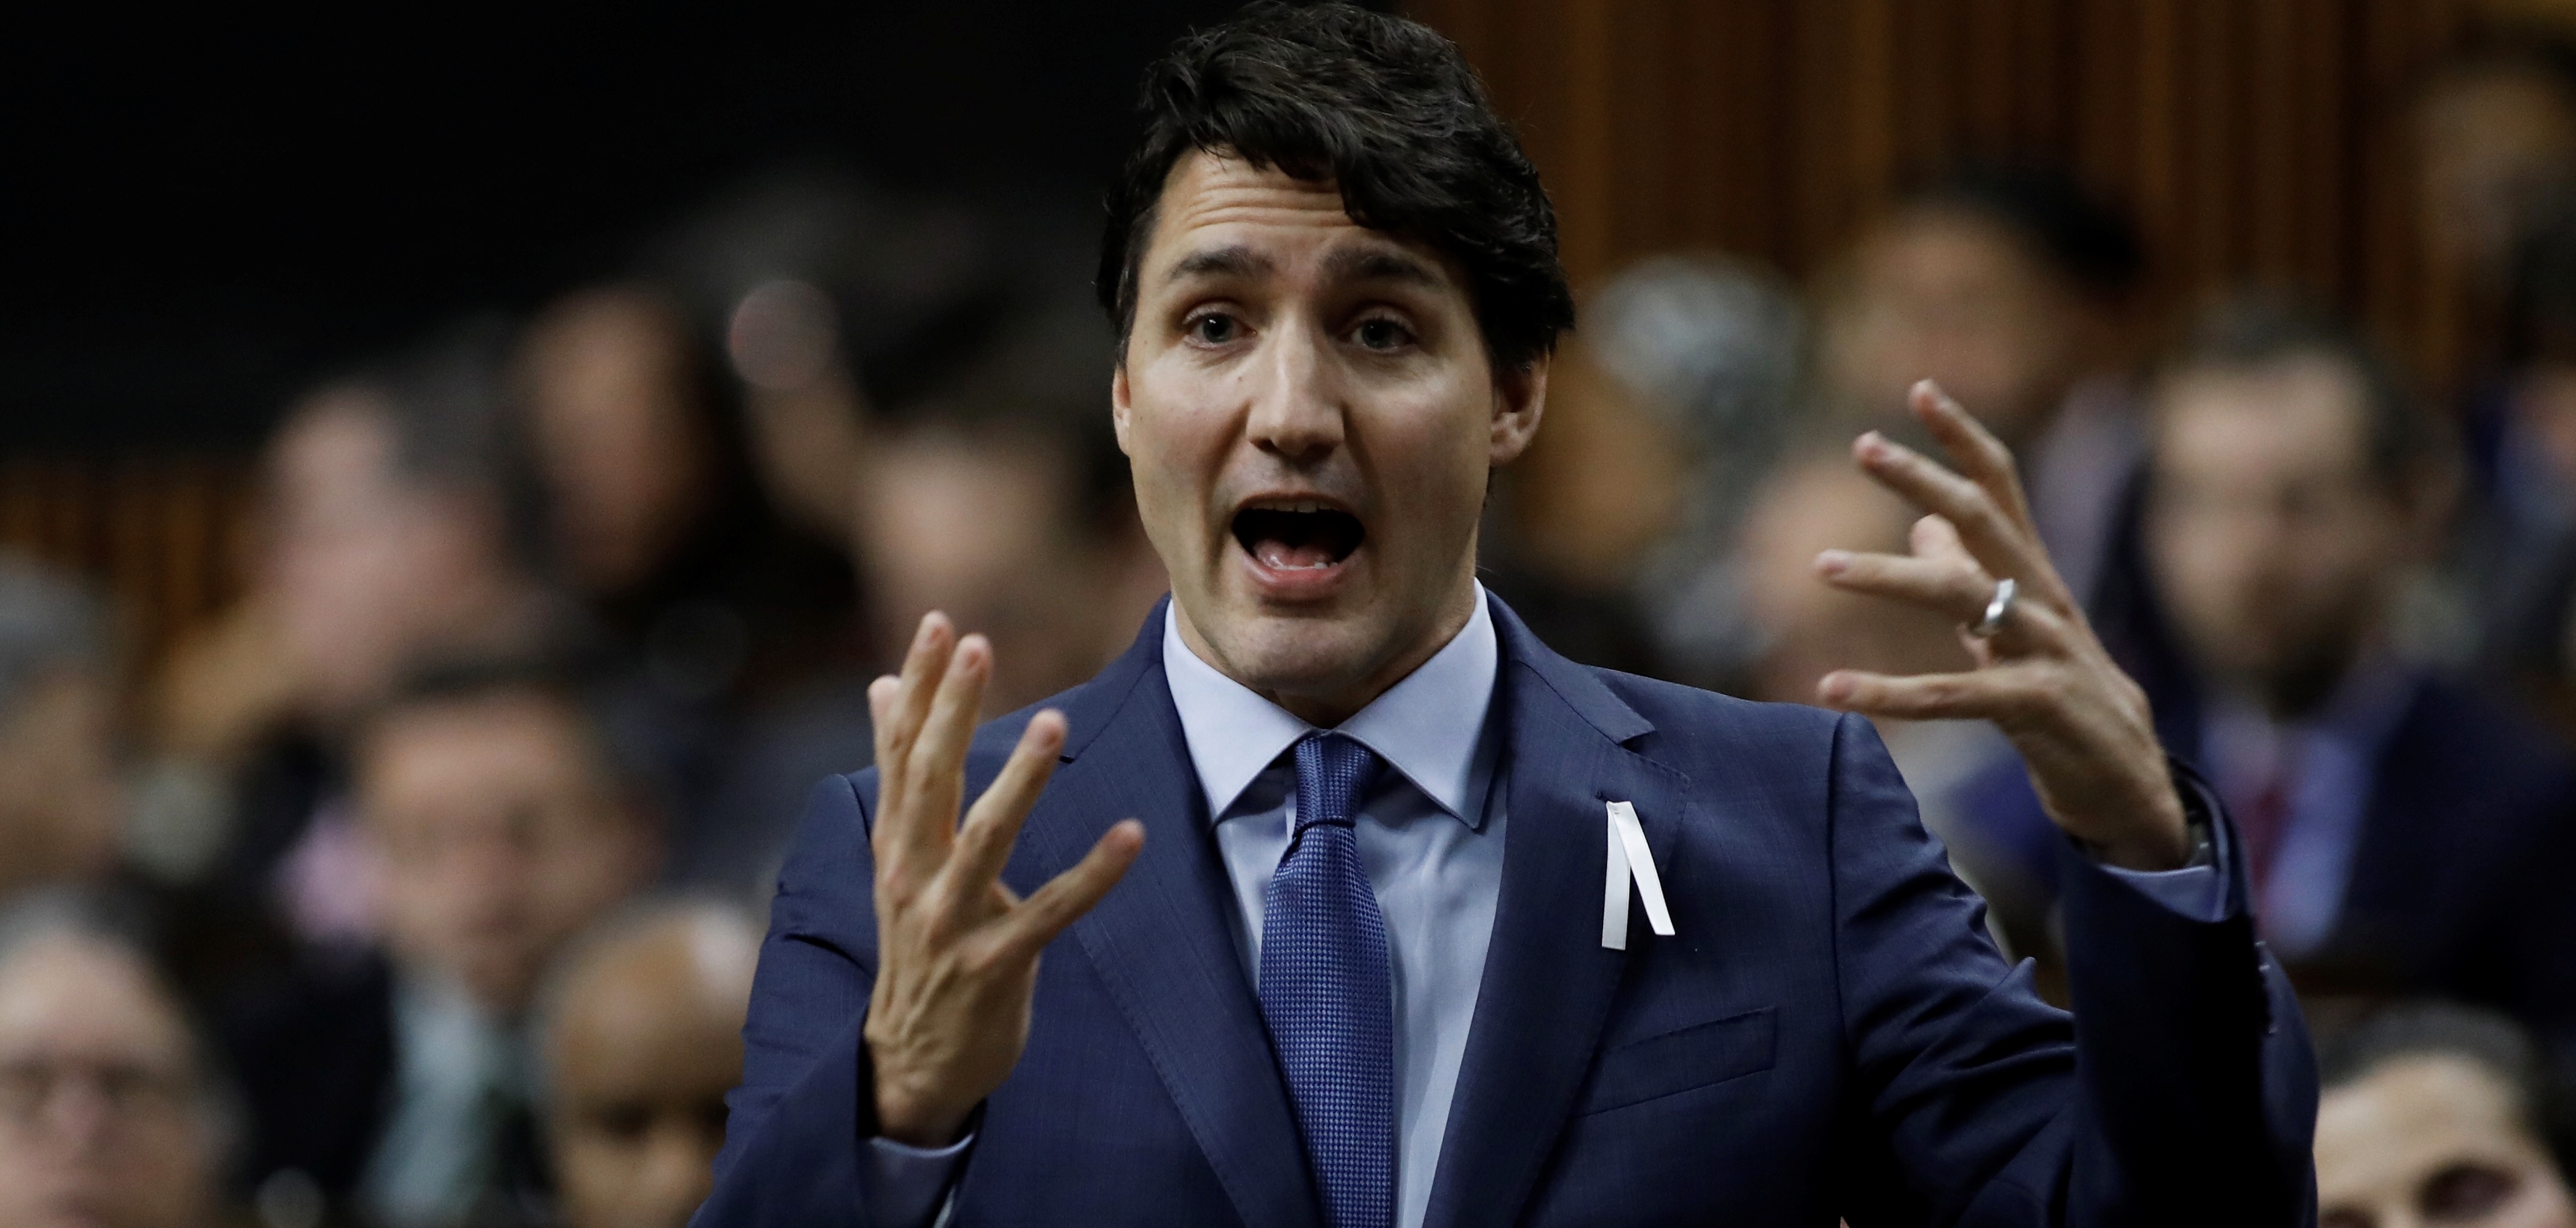 Canada's Prime Minister Justin Trudeau speaks during debate about the Throne Speech during in the House of Commons on Parliament Hill in Ottawa, Ontario, Canada December 6, 2019. REUTERS/Blair Gable